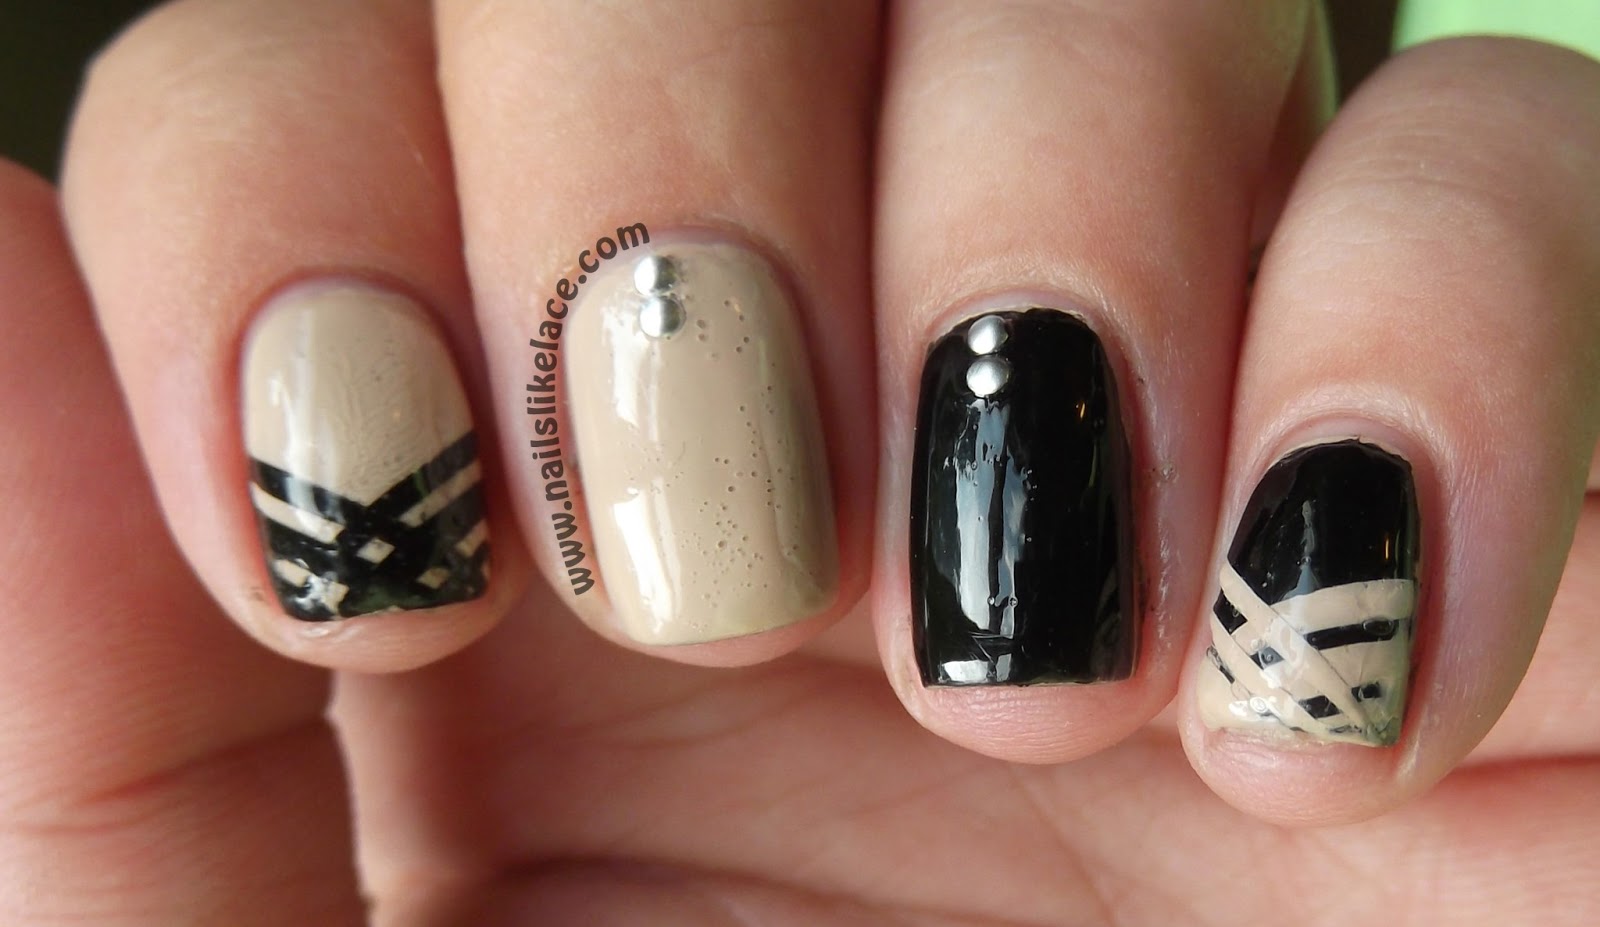 NailsLikeLace: Black and Nude - Studded Criss-Cross Nails